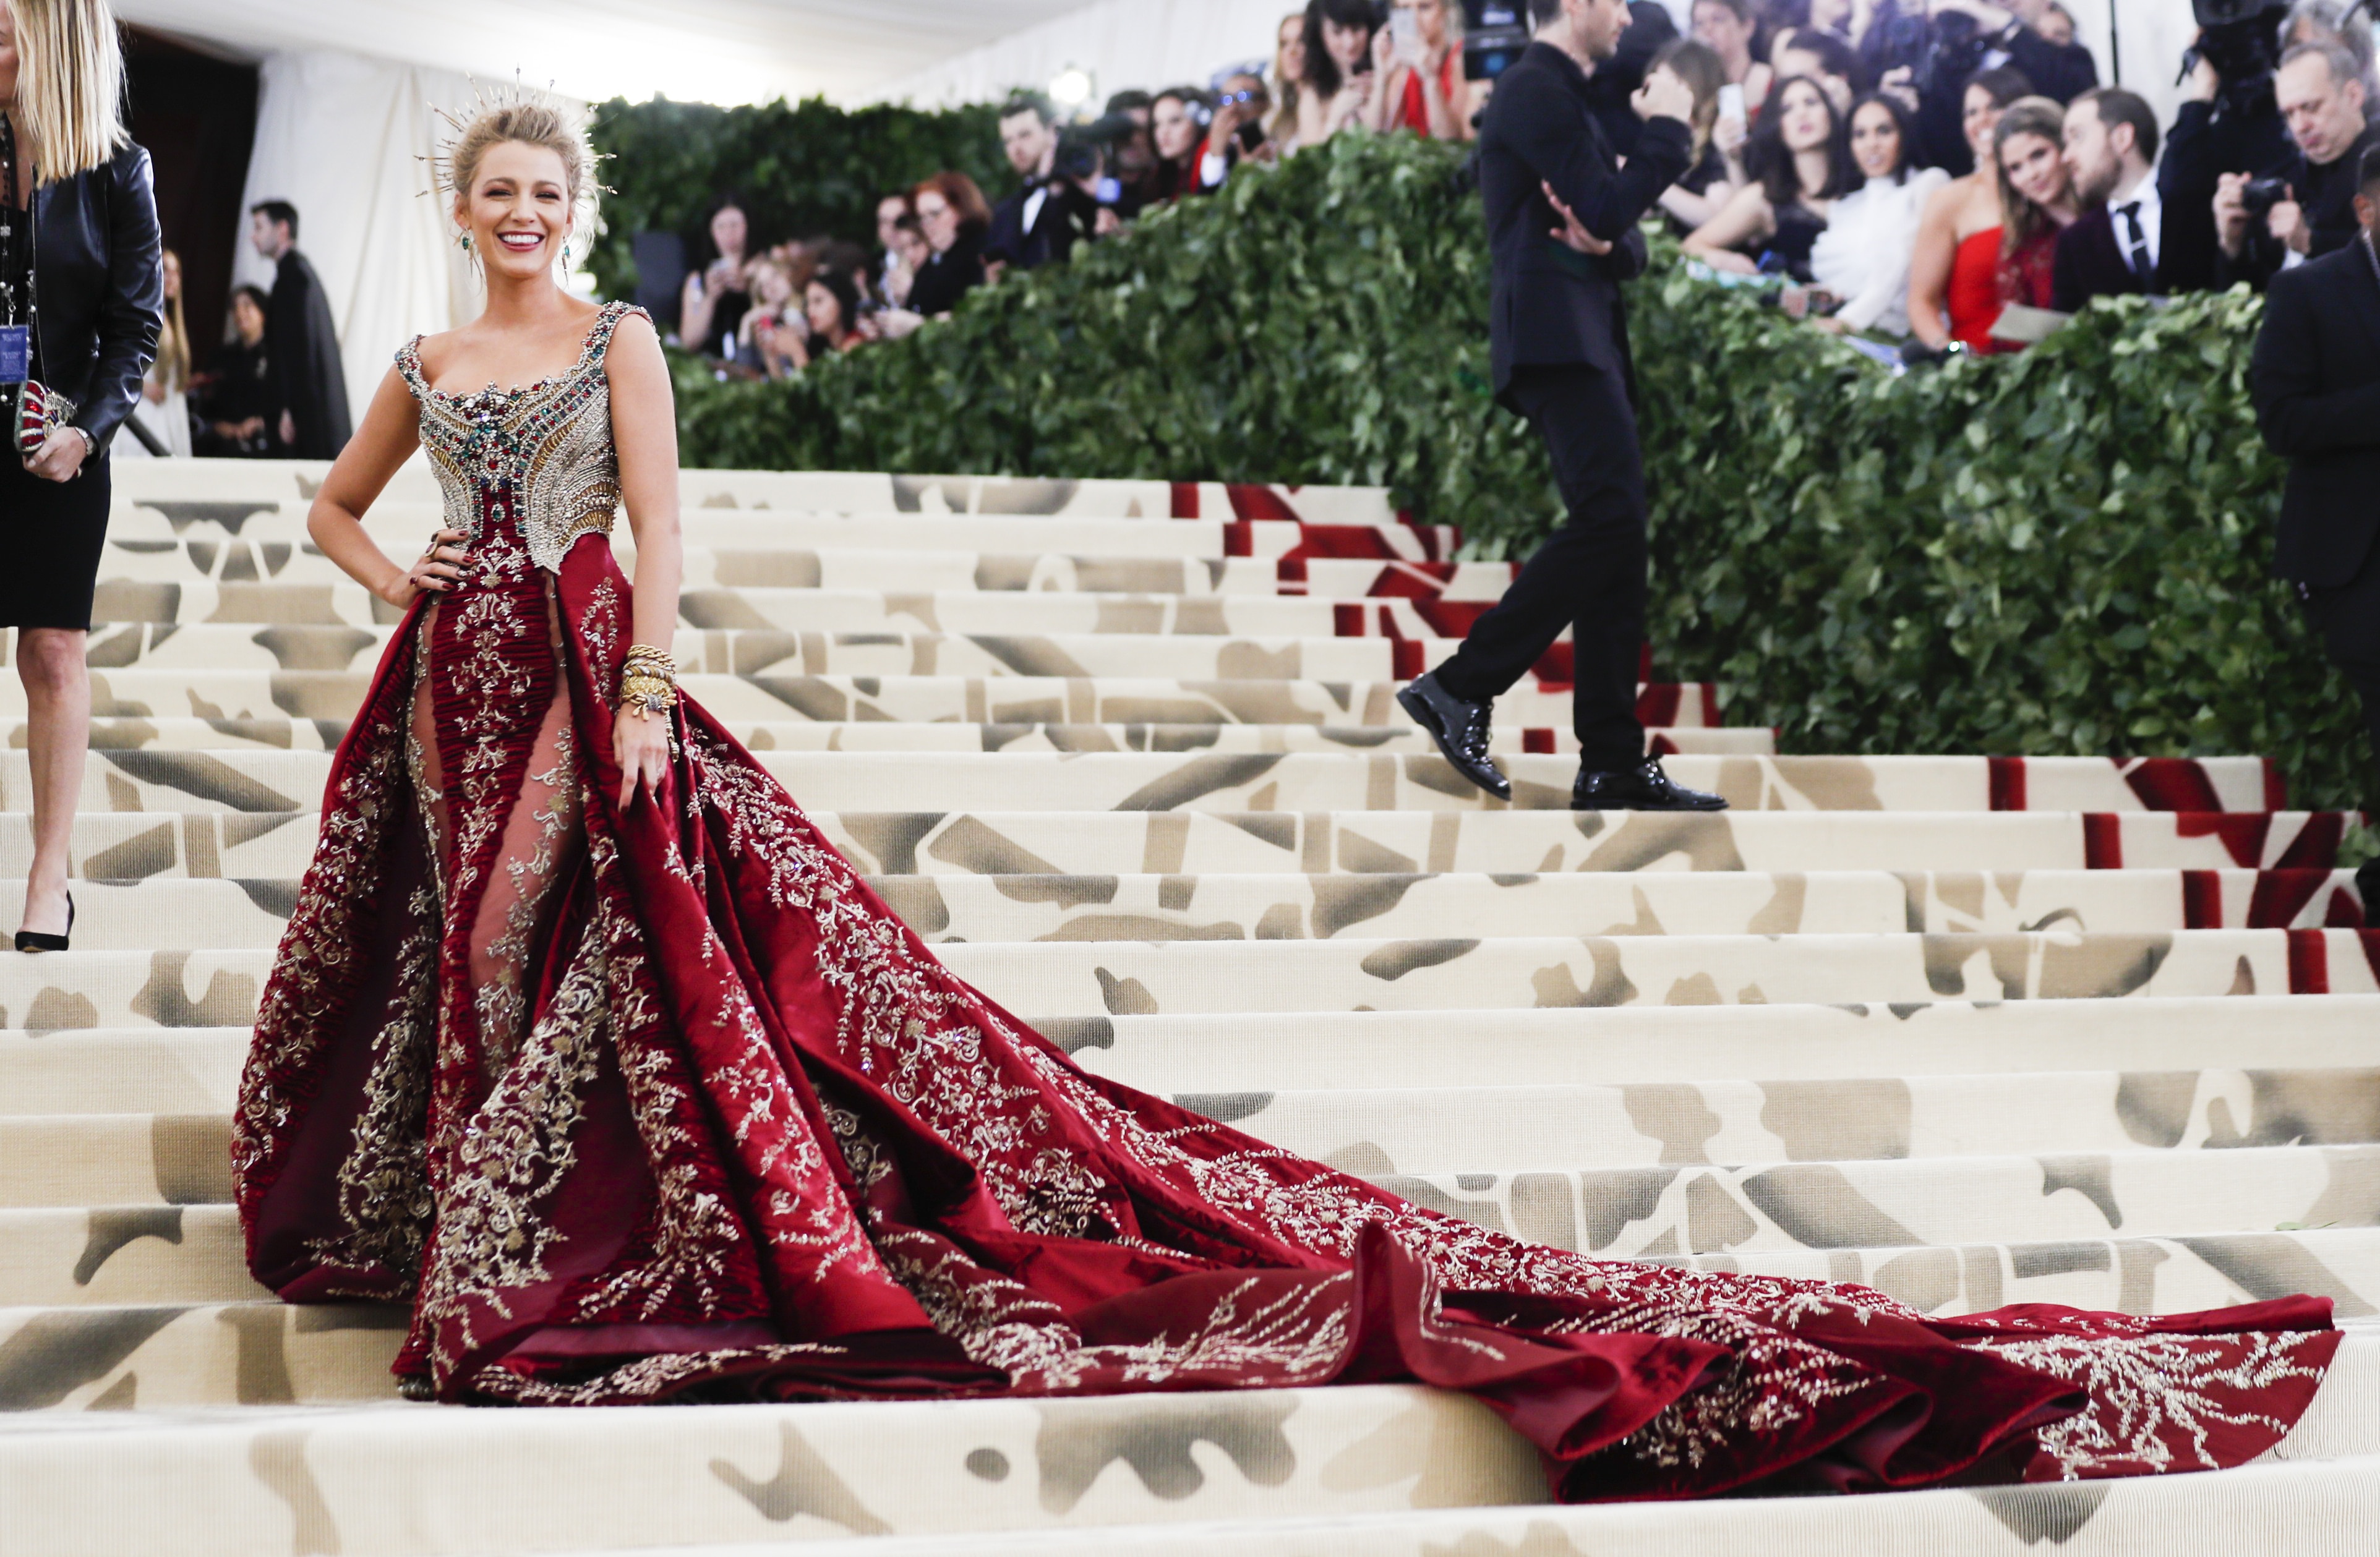 Blake Lively wearing a gown with an embellished gold metallic top and a red velvet skirt with a halo-like crown